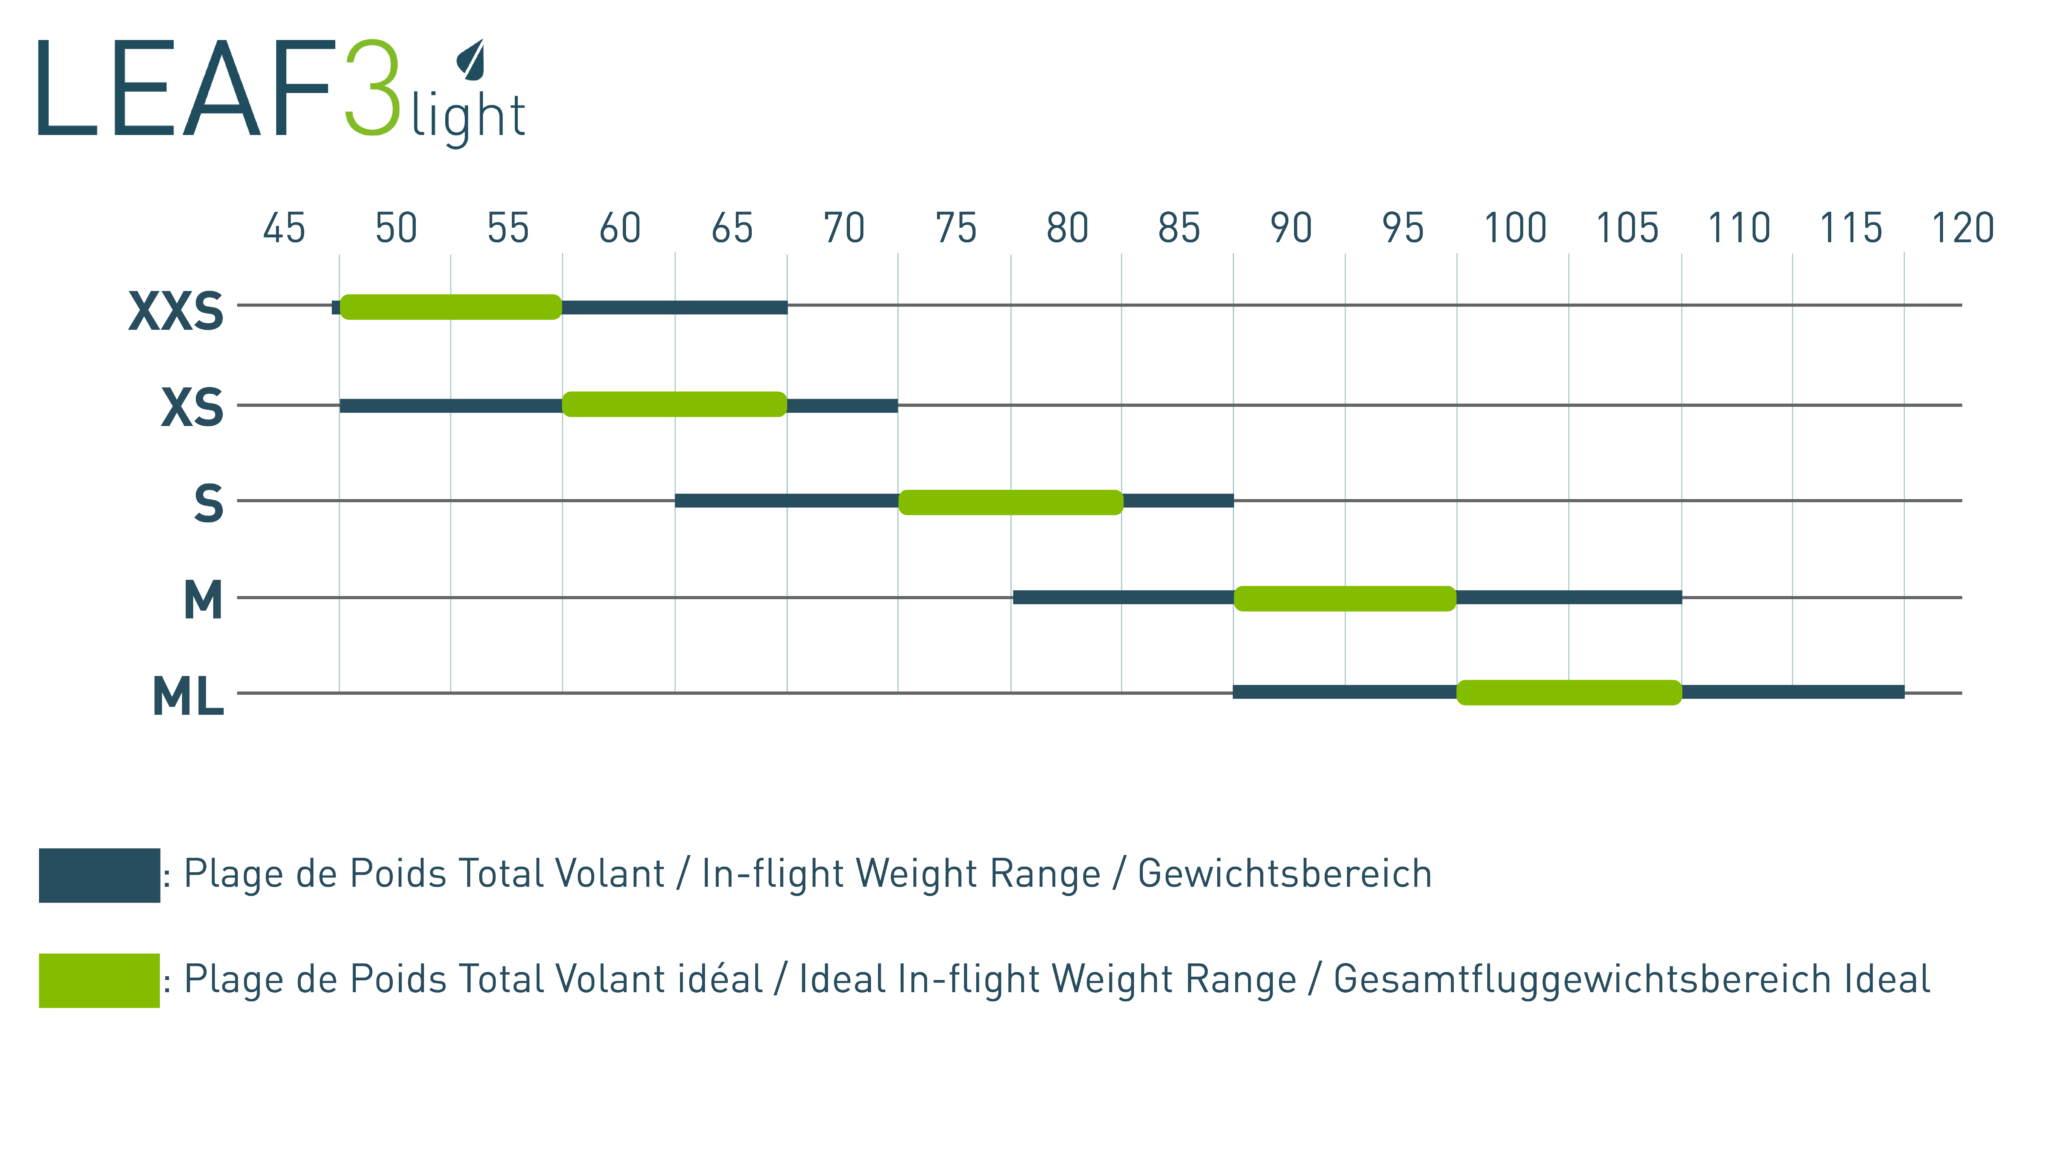 Table of Total Flying Weight ranges for the LEAF3 light